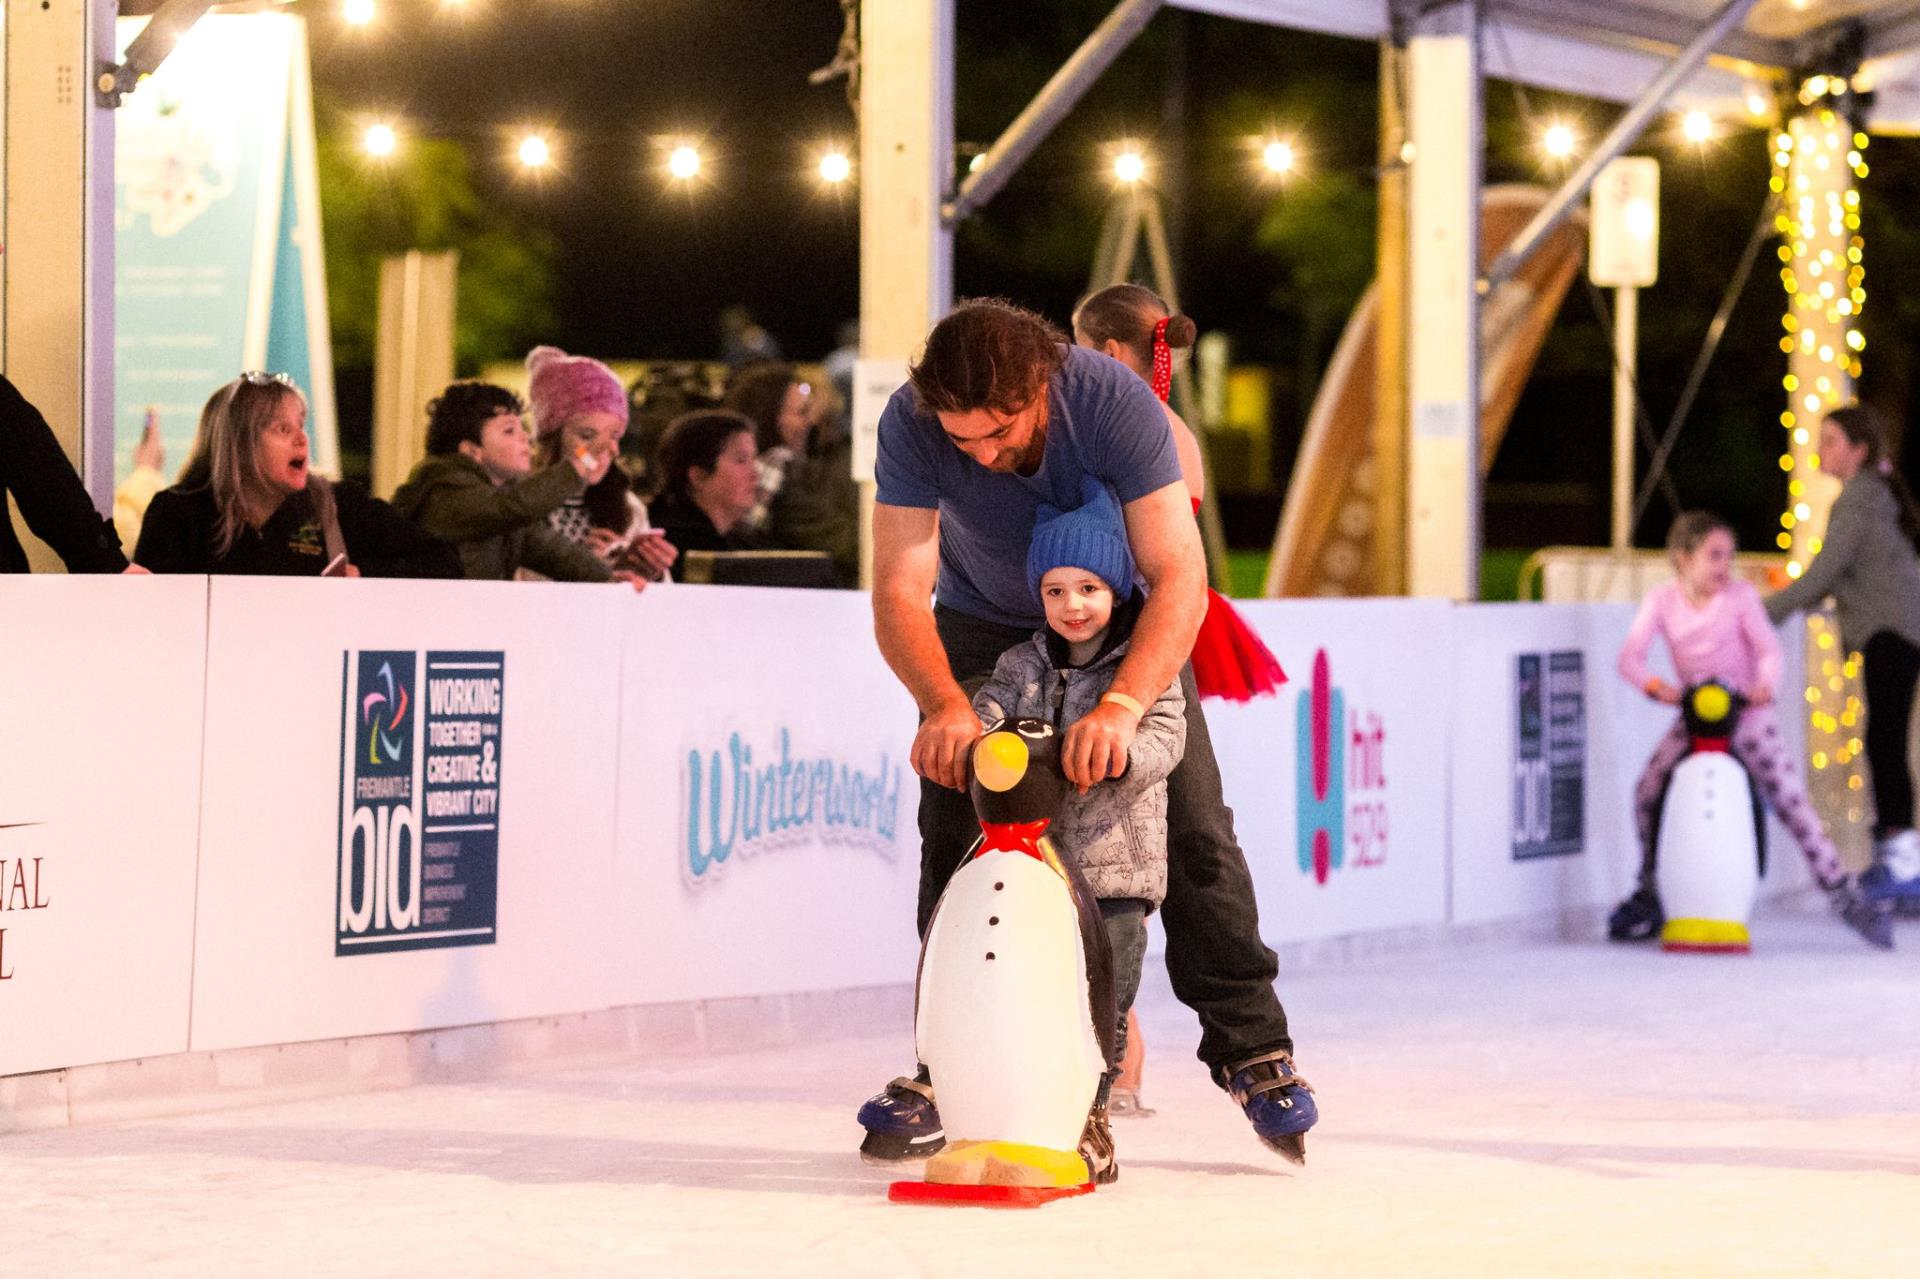 Ice-rink coming to Kalgoorlie-Boulder these school holidays